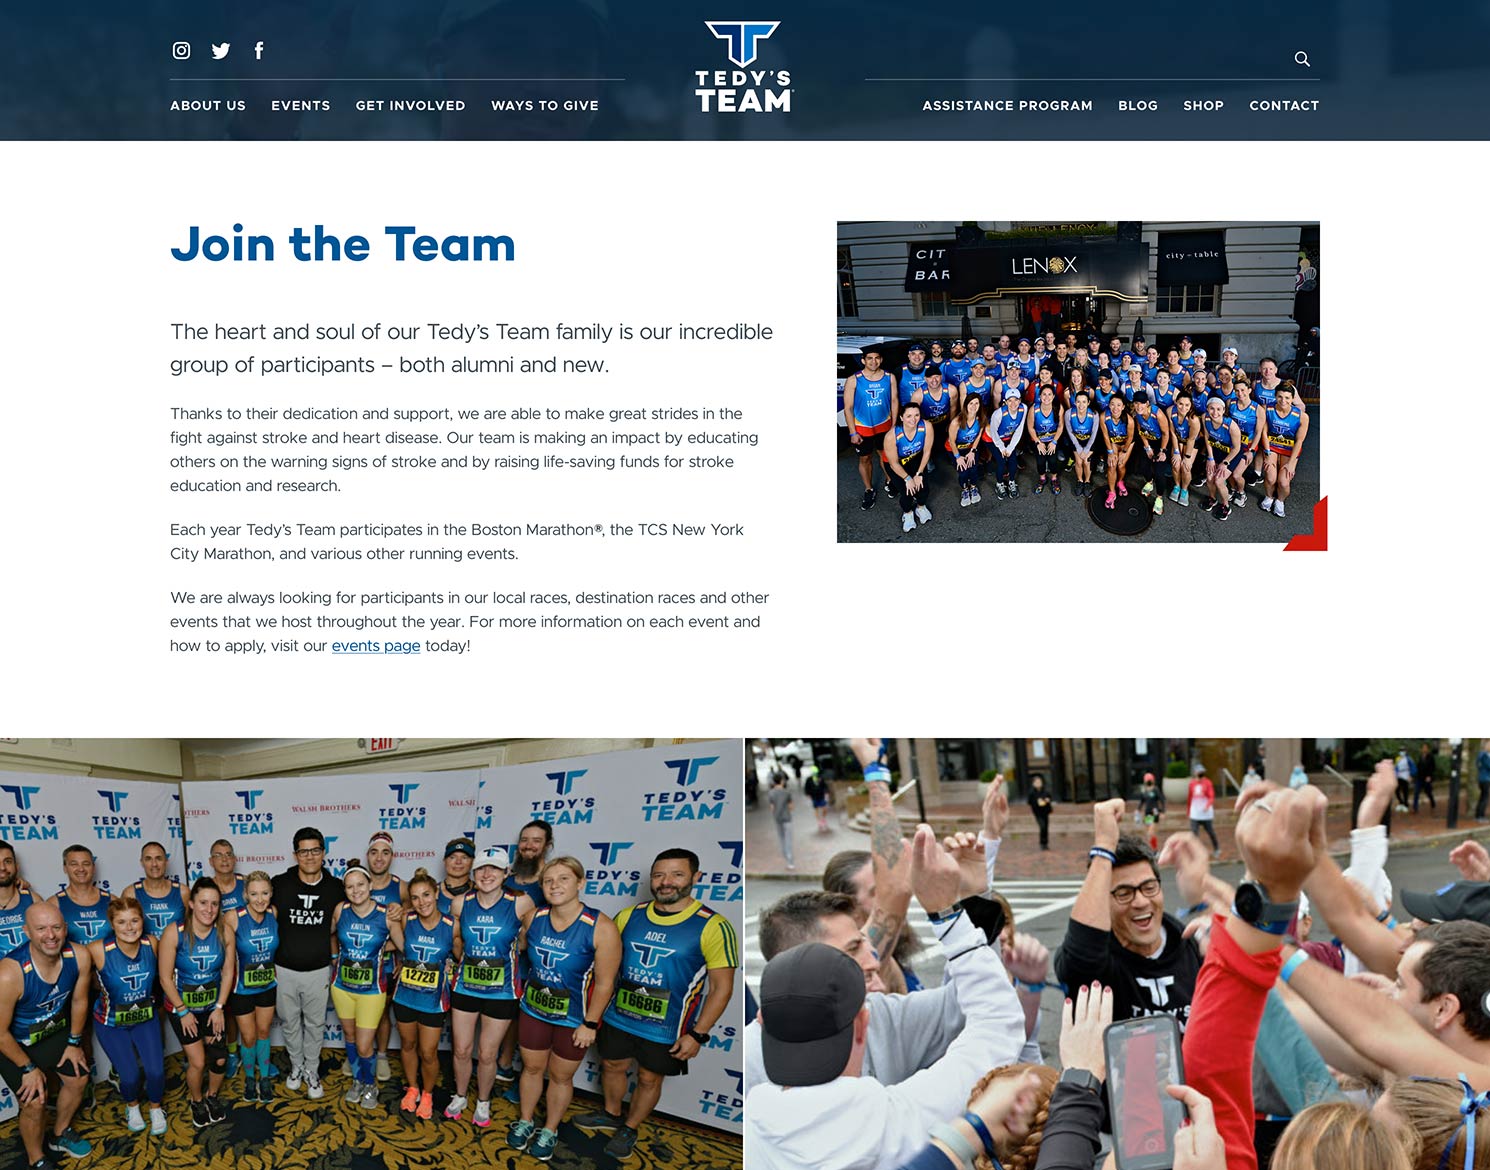 Tedy's Team website design showing Join the Team page